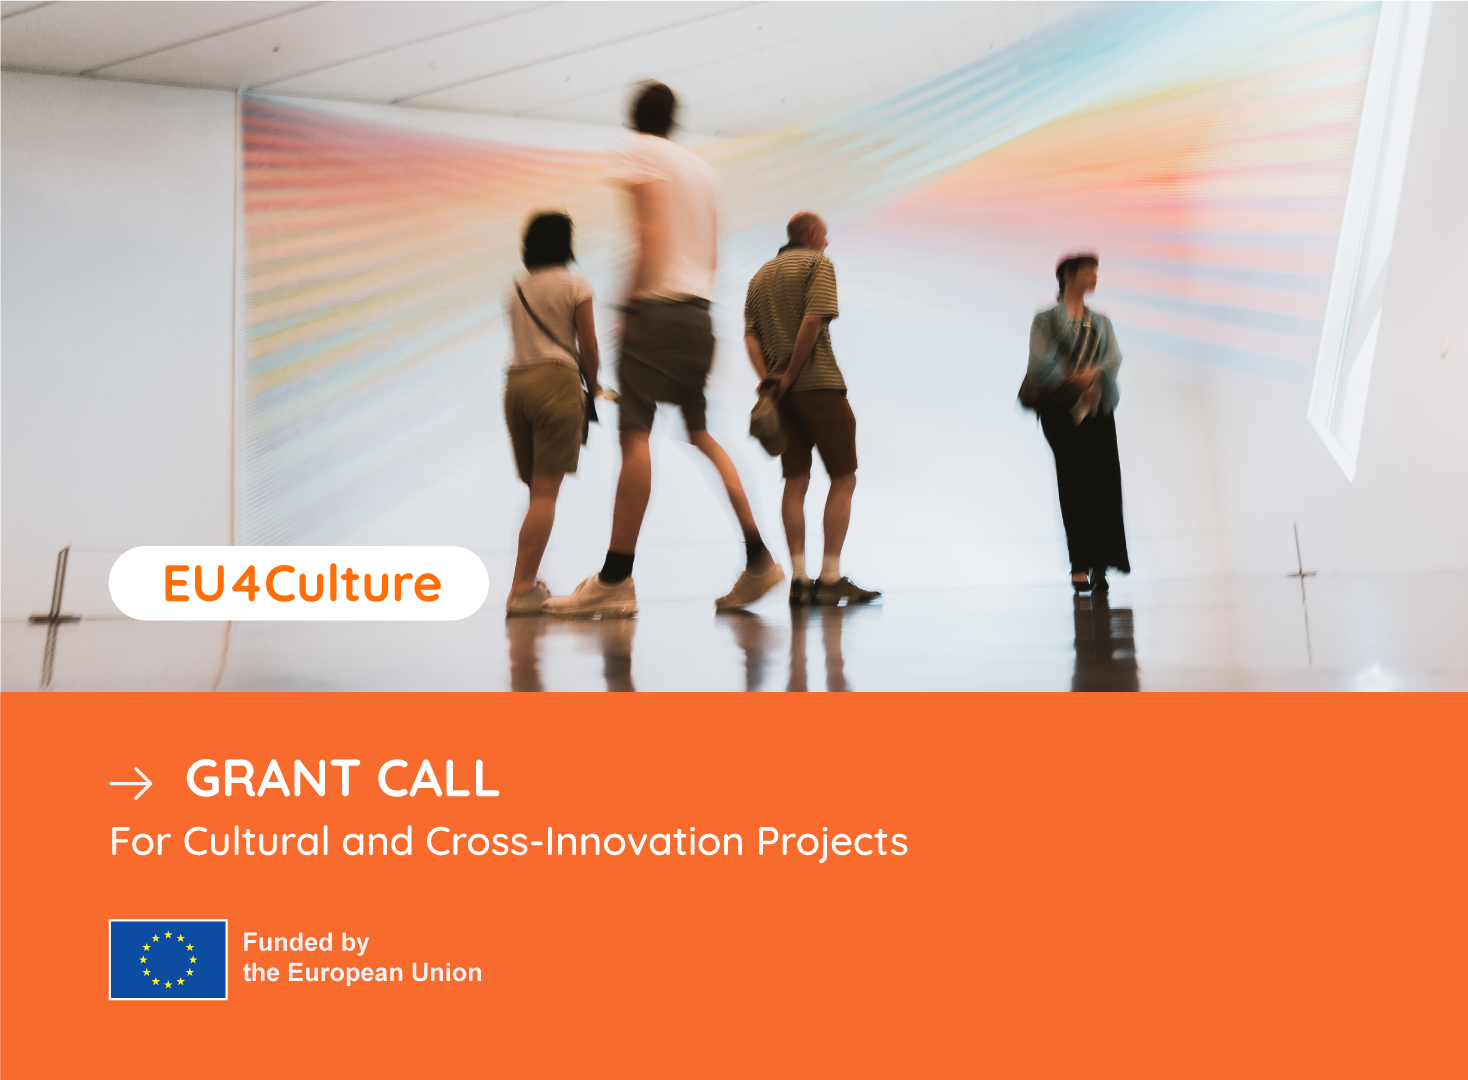 EU4Culture launches a call for cultural and cross-innovation projects in the Eastern Partnership countries